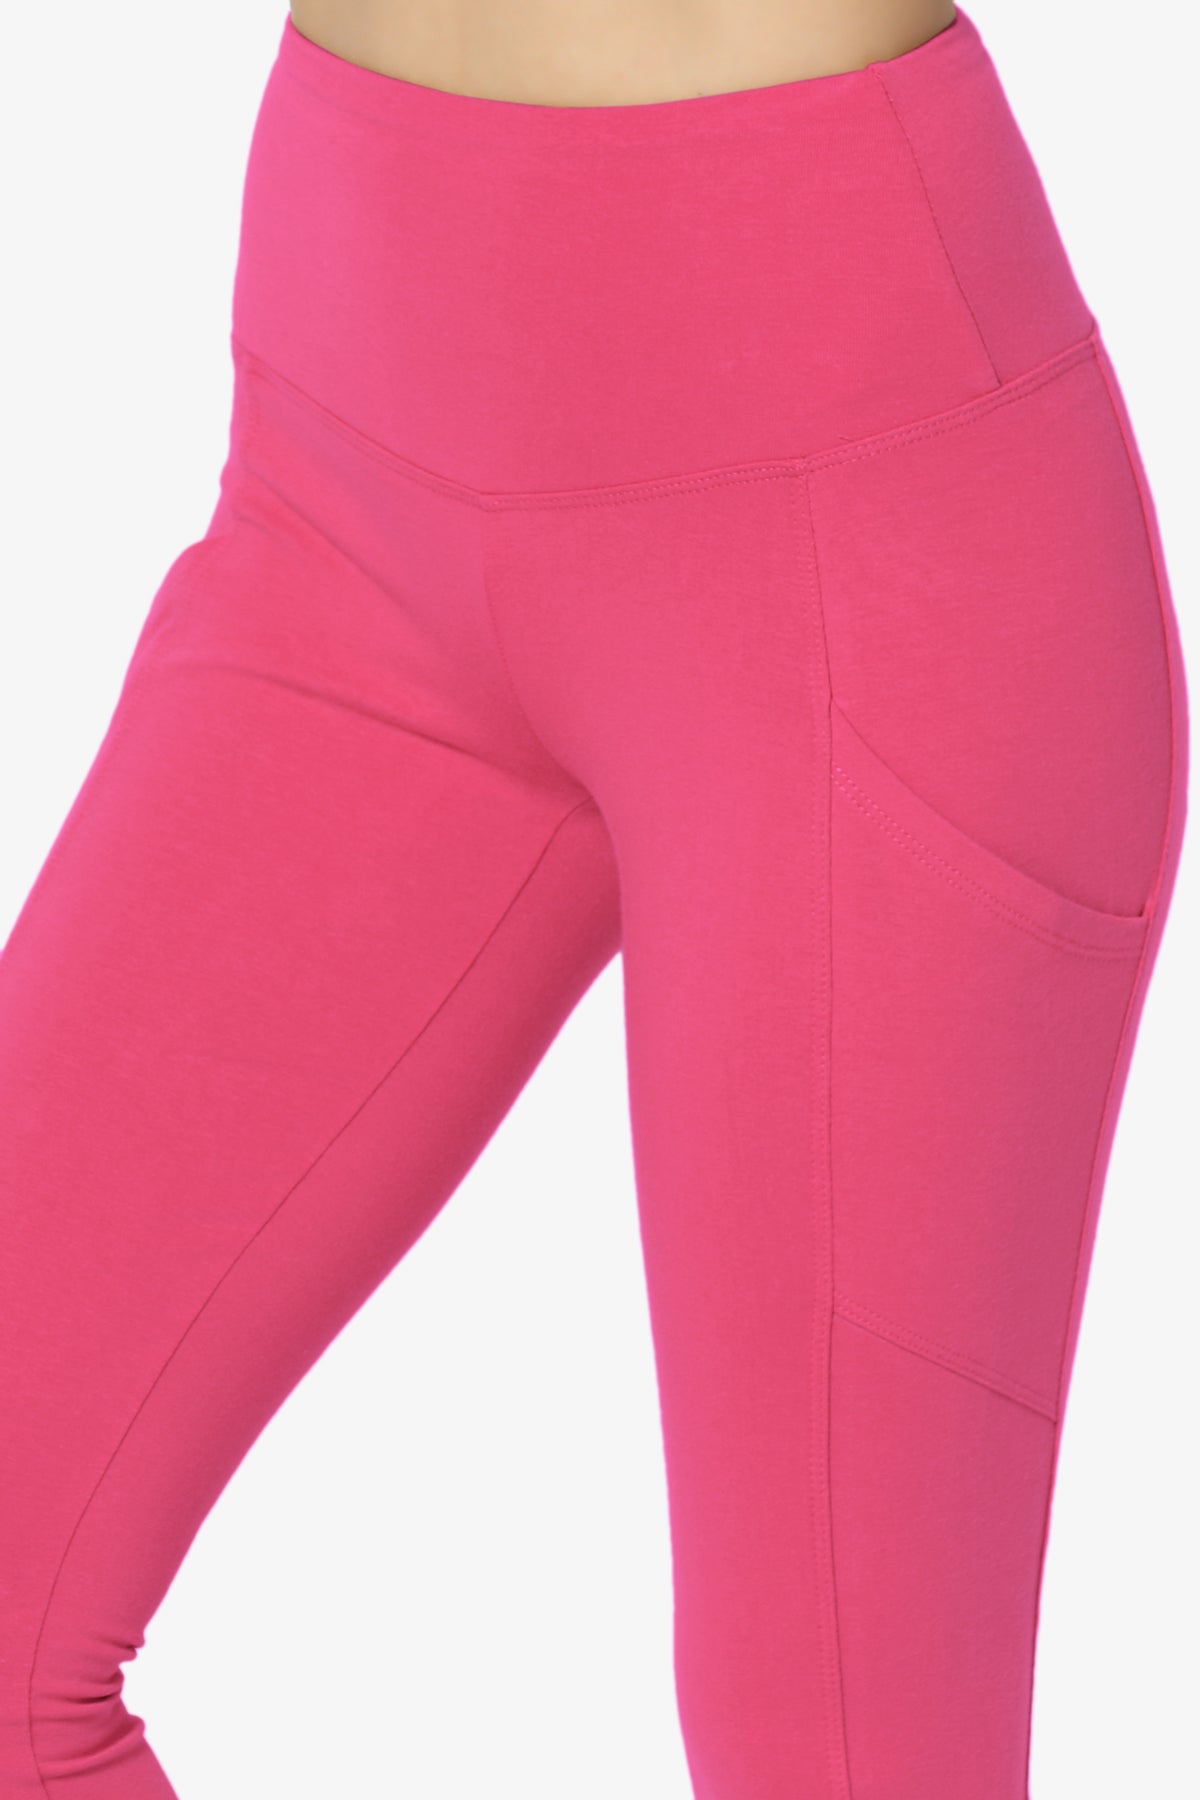 Ansley Luxe Cotton Leggings with Pockets HOT PINK_5